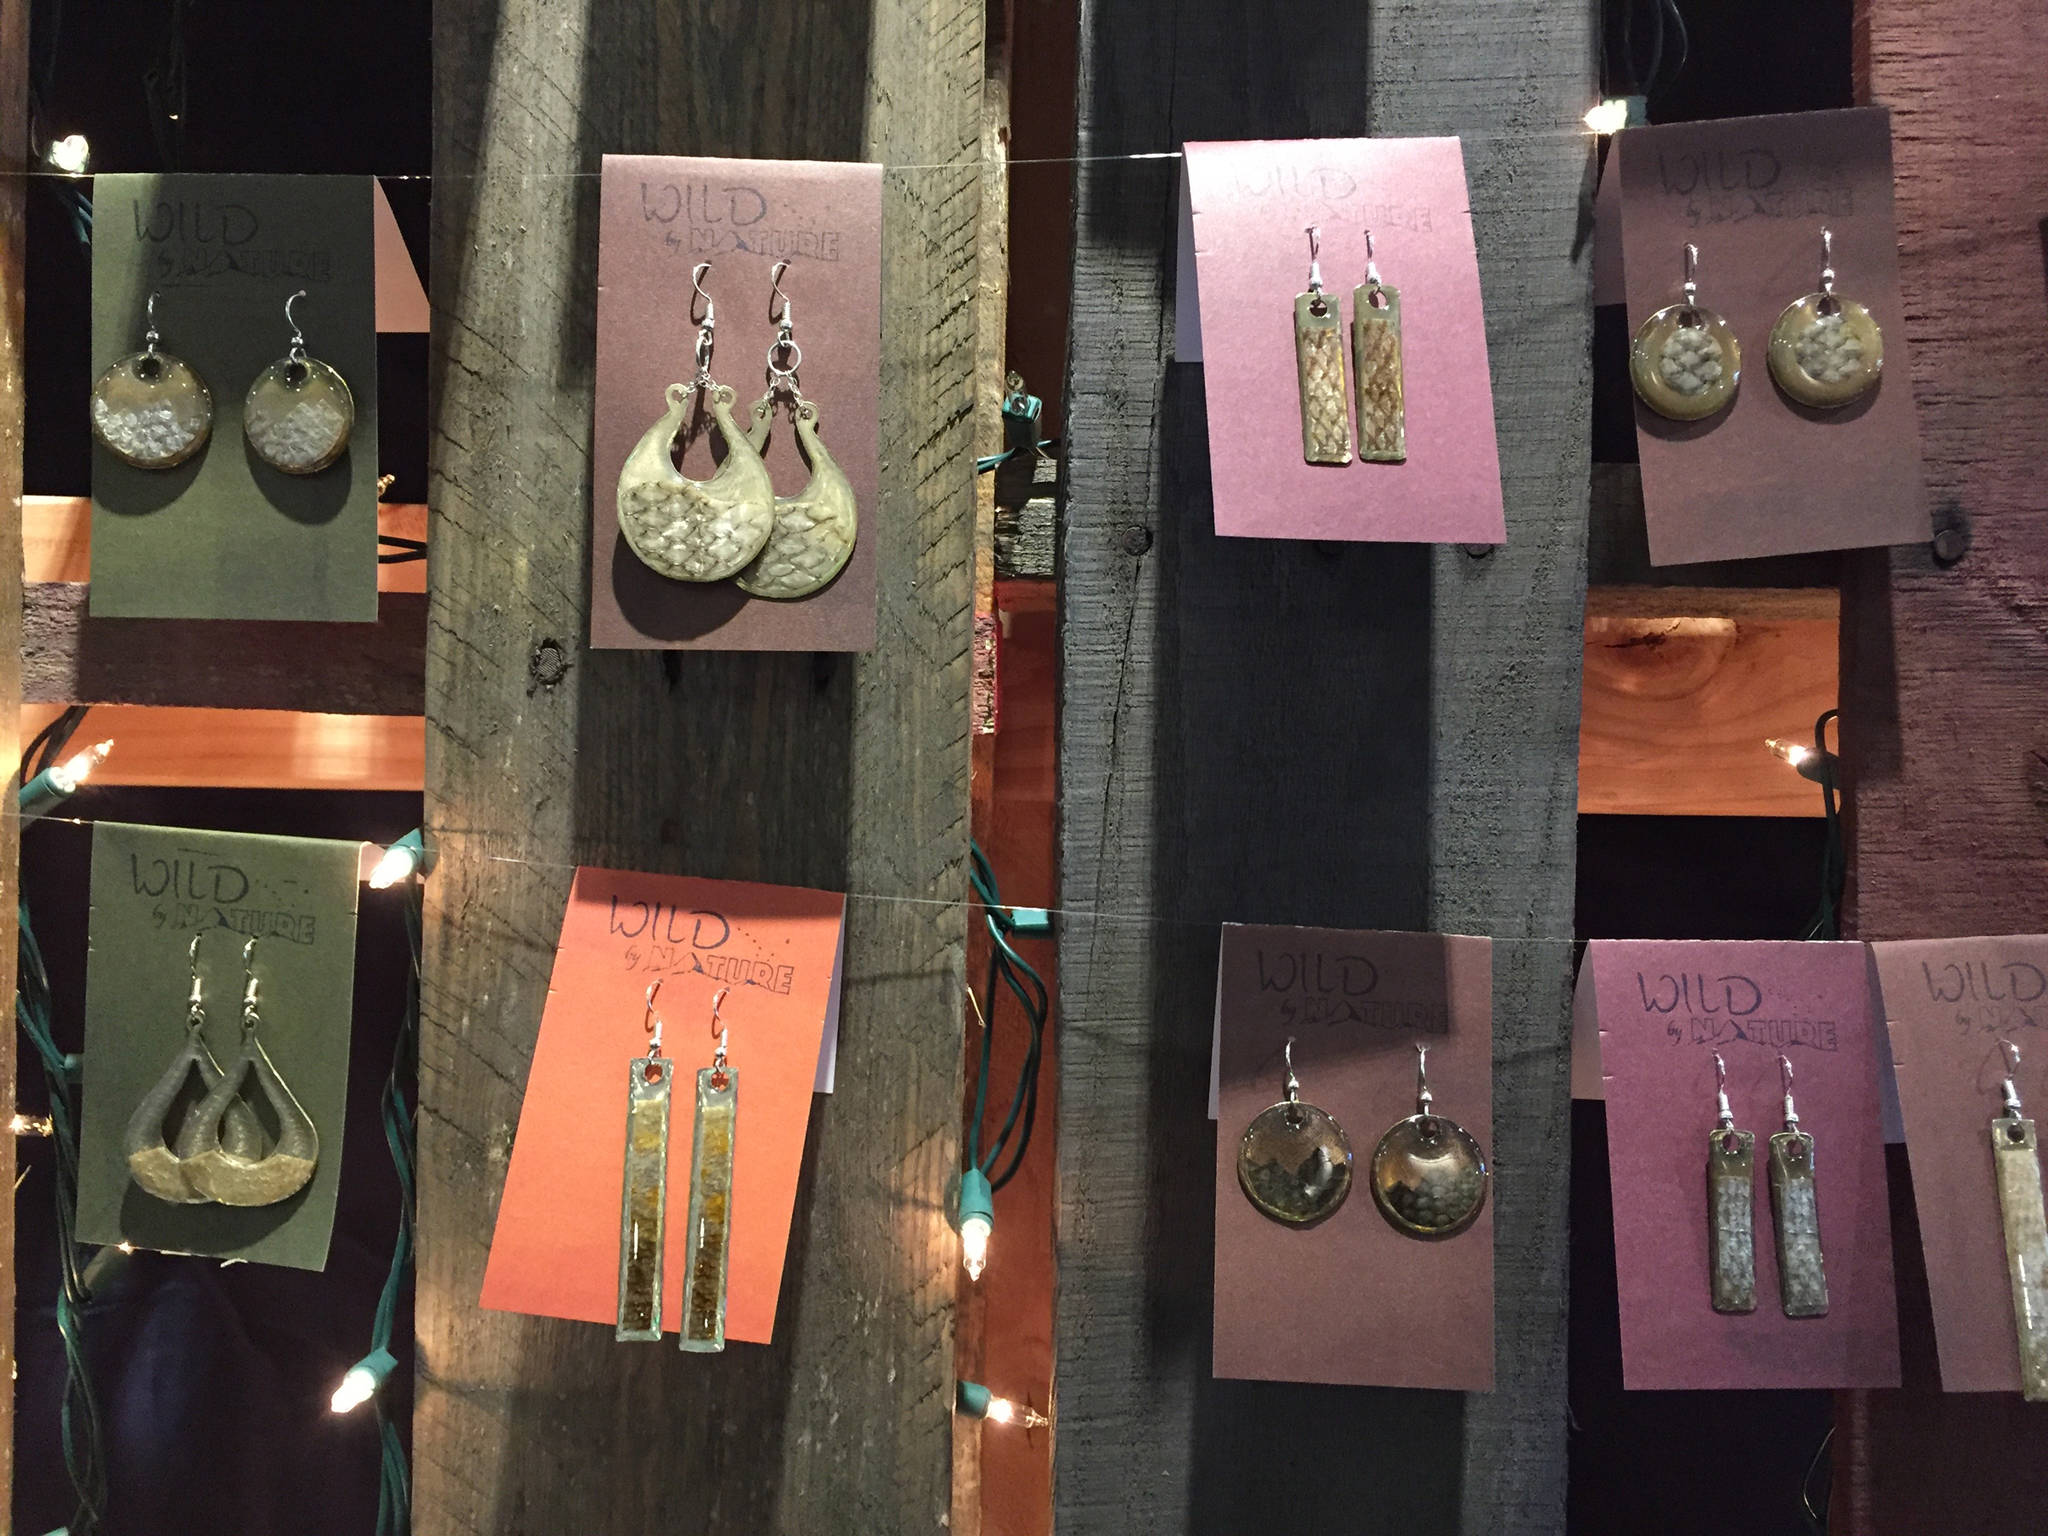 Earrings created using the skin of salmon and other wild Alaska fish, created by Juneau artist Julienne Pacheco, are on display at Juneau’s Public Market in November of 2017. (Mary Catharine Martin | SalmonState)